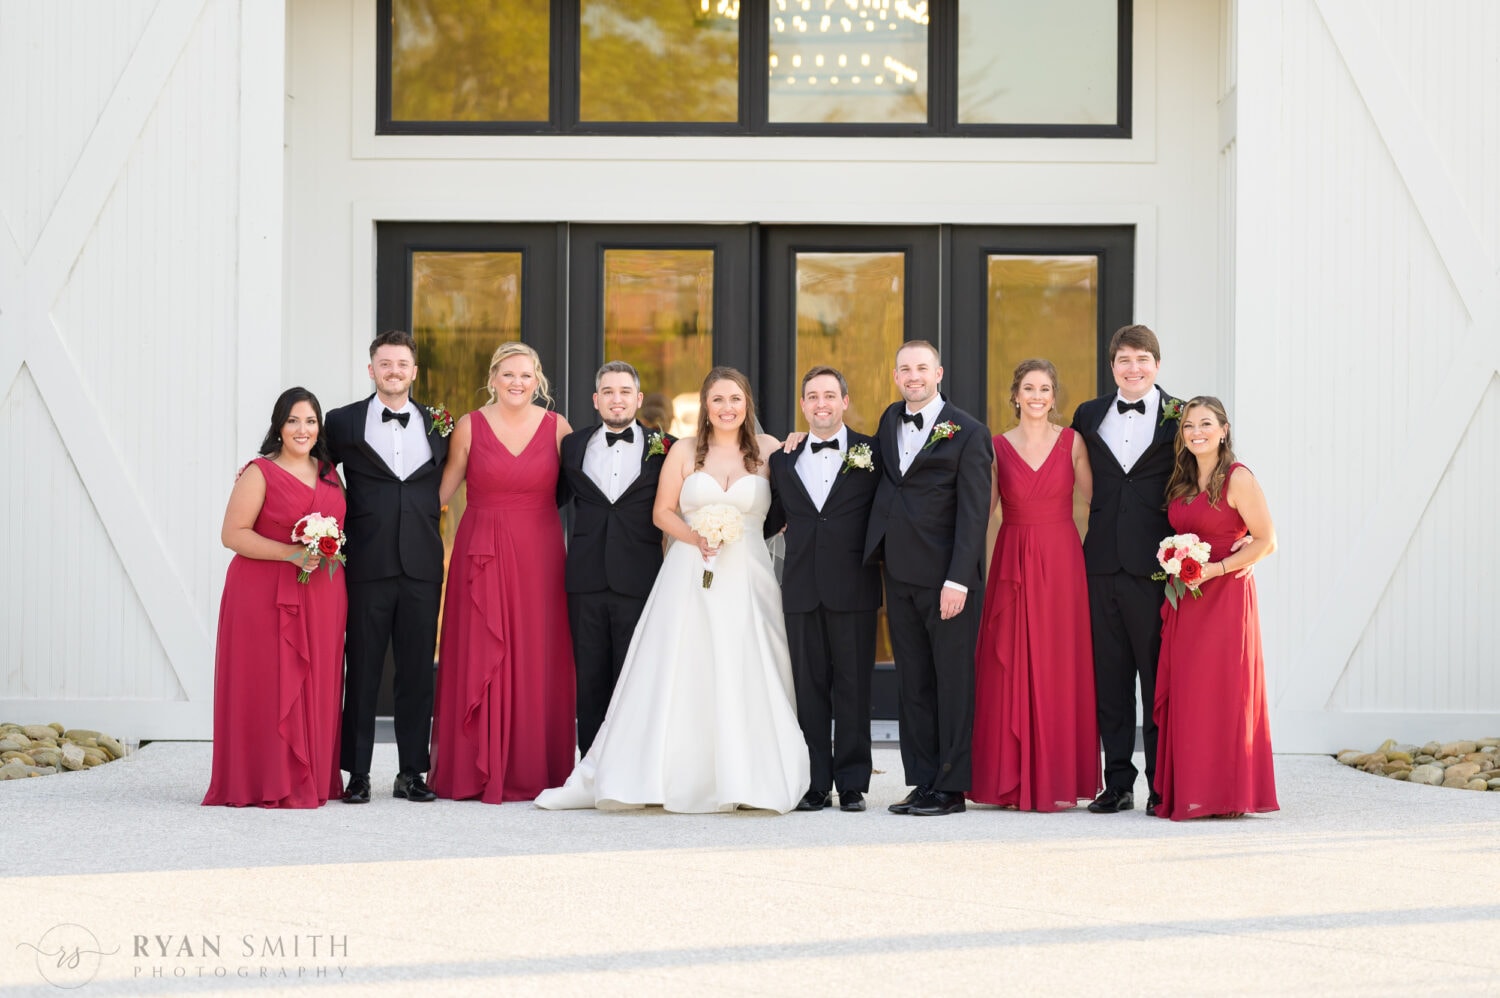 Hugs with the bridal party - The Venue at White Oaks Farm